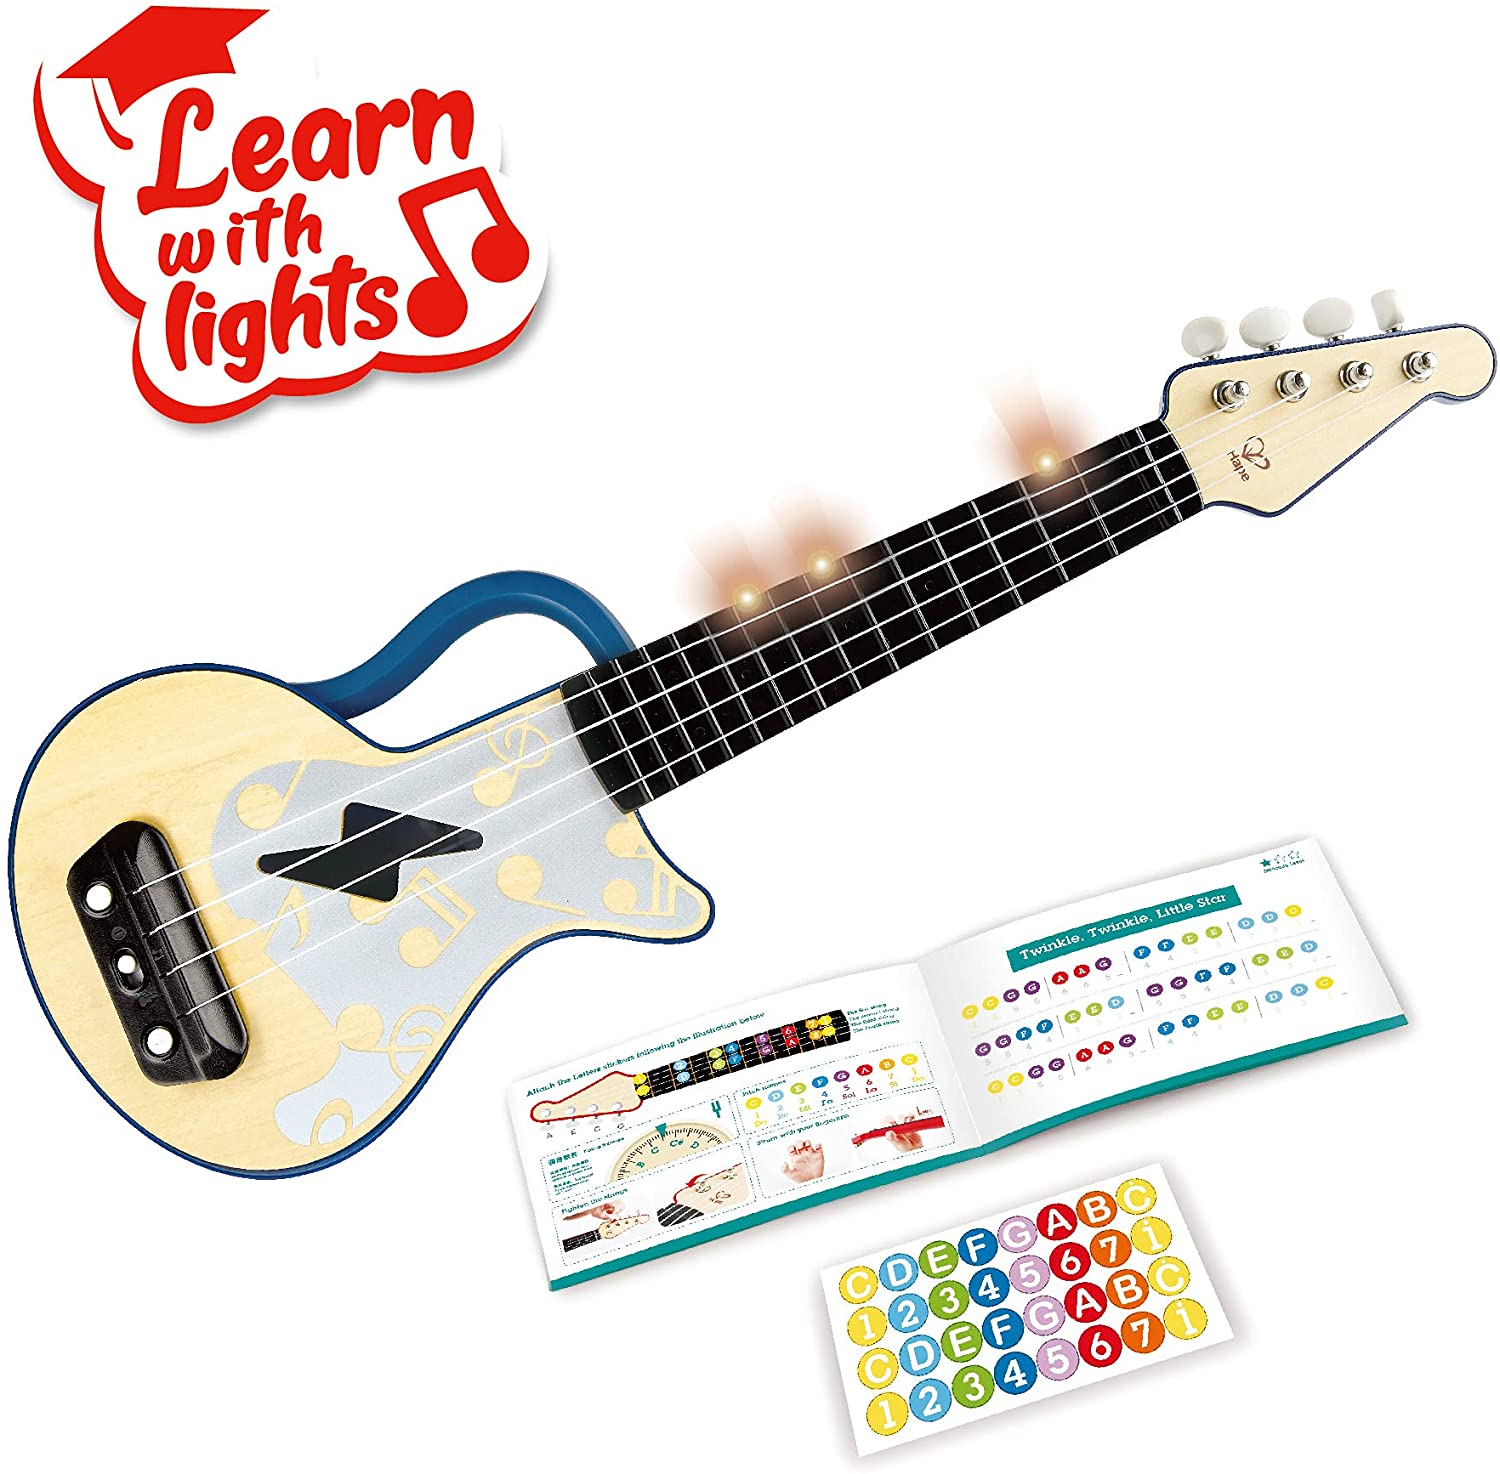 (OPEN BOX) Hape Learn with Lights | USB Charging Capabilities | Leaning and Band Mode | Musical Instrument